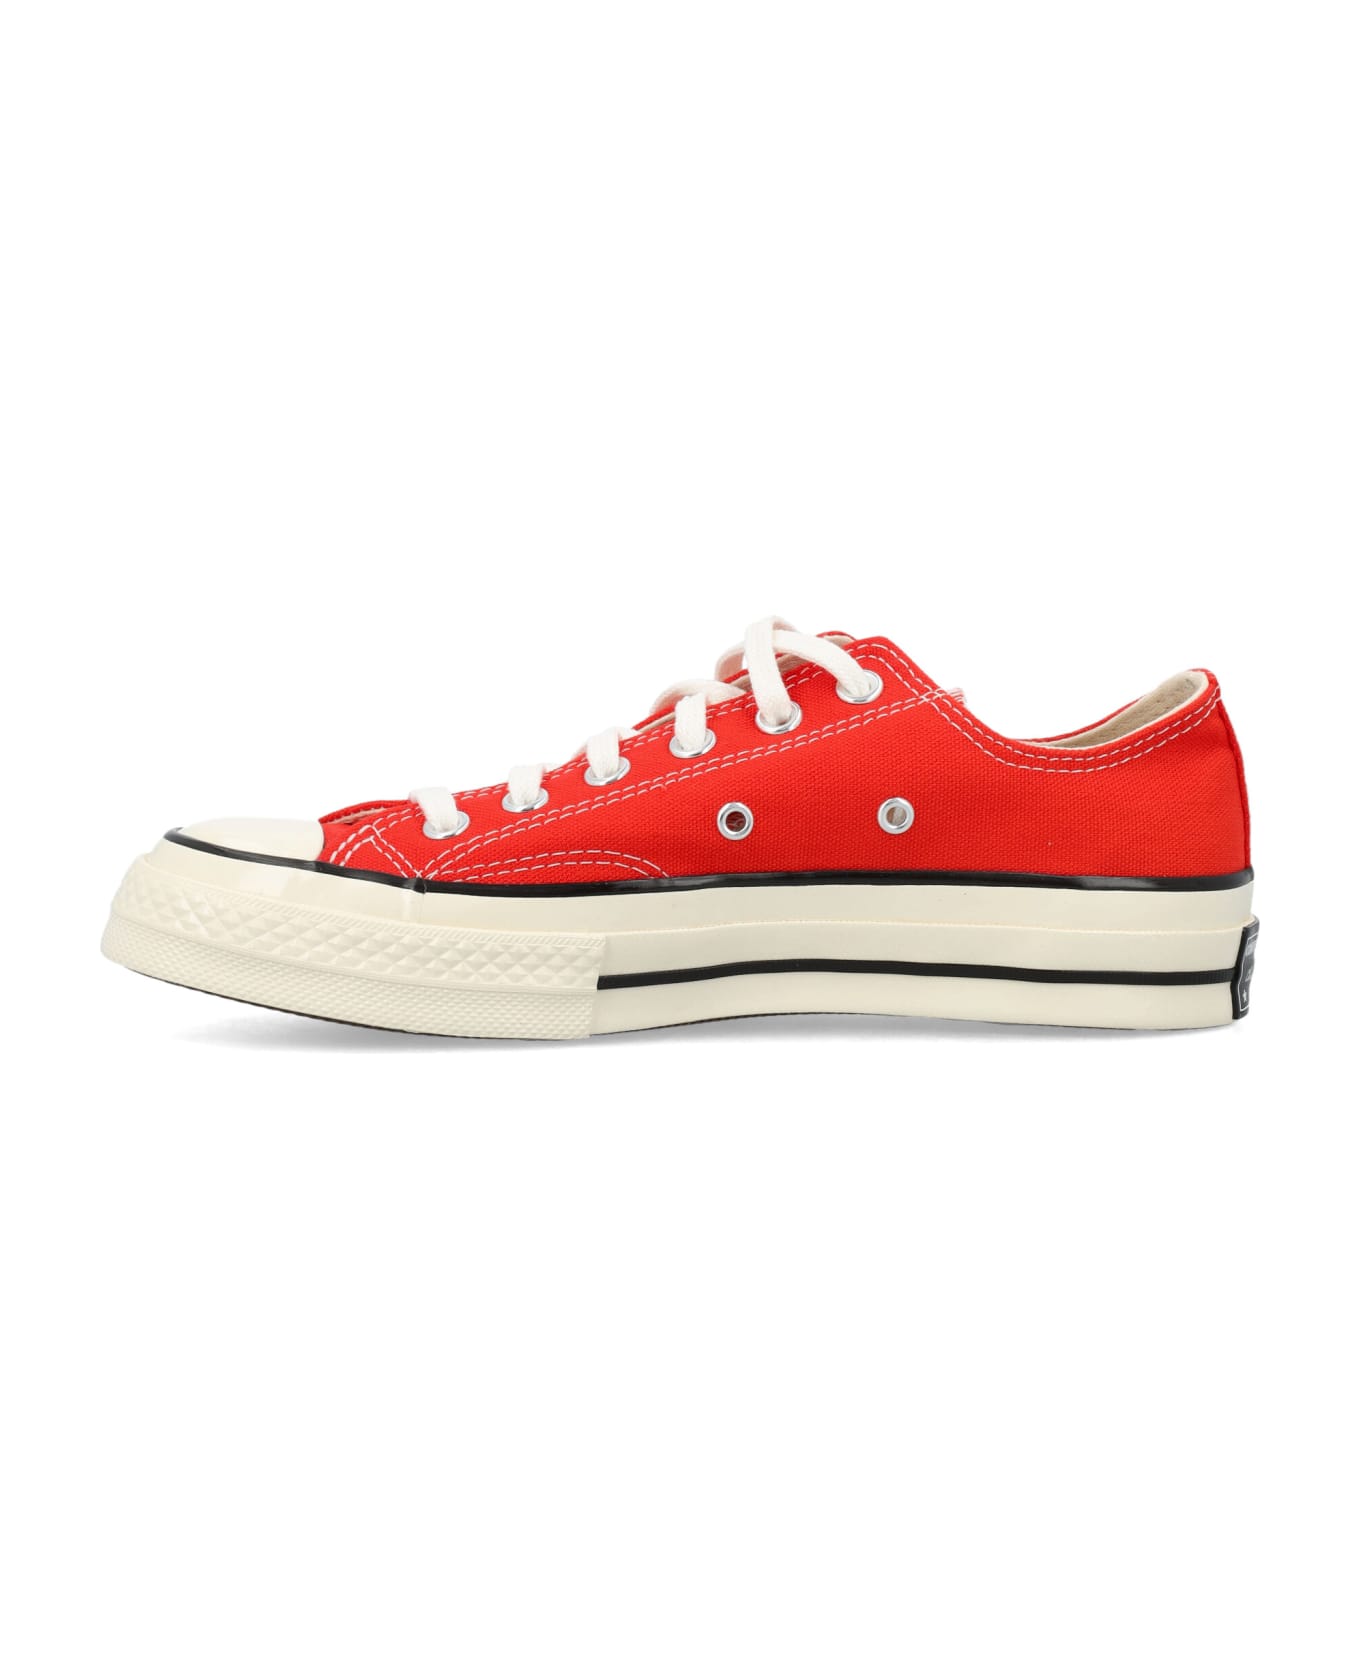 Converse Chuck 70 Sneakers - FEVER DREAM/EGRET/PUNCH